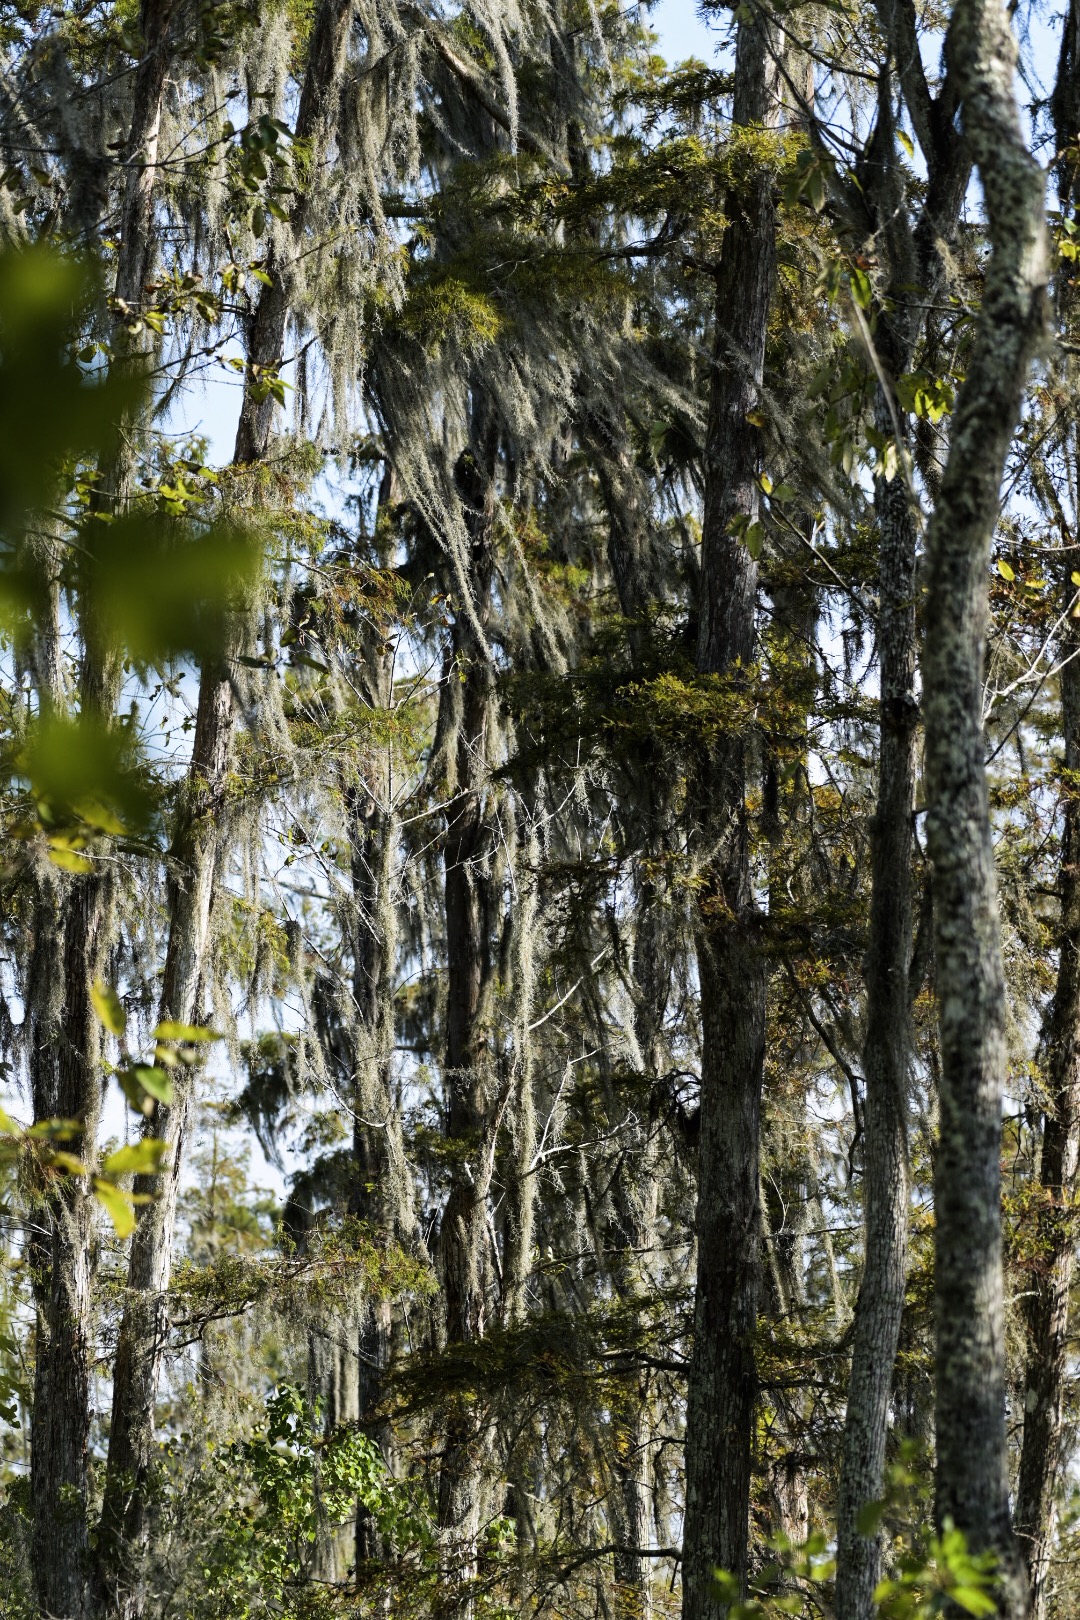 Moss hanging from trees in Barataria Preserve